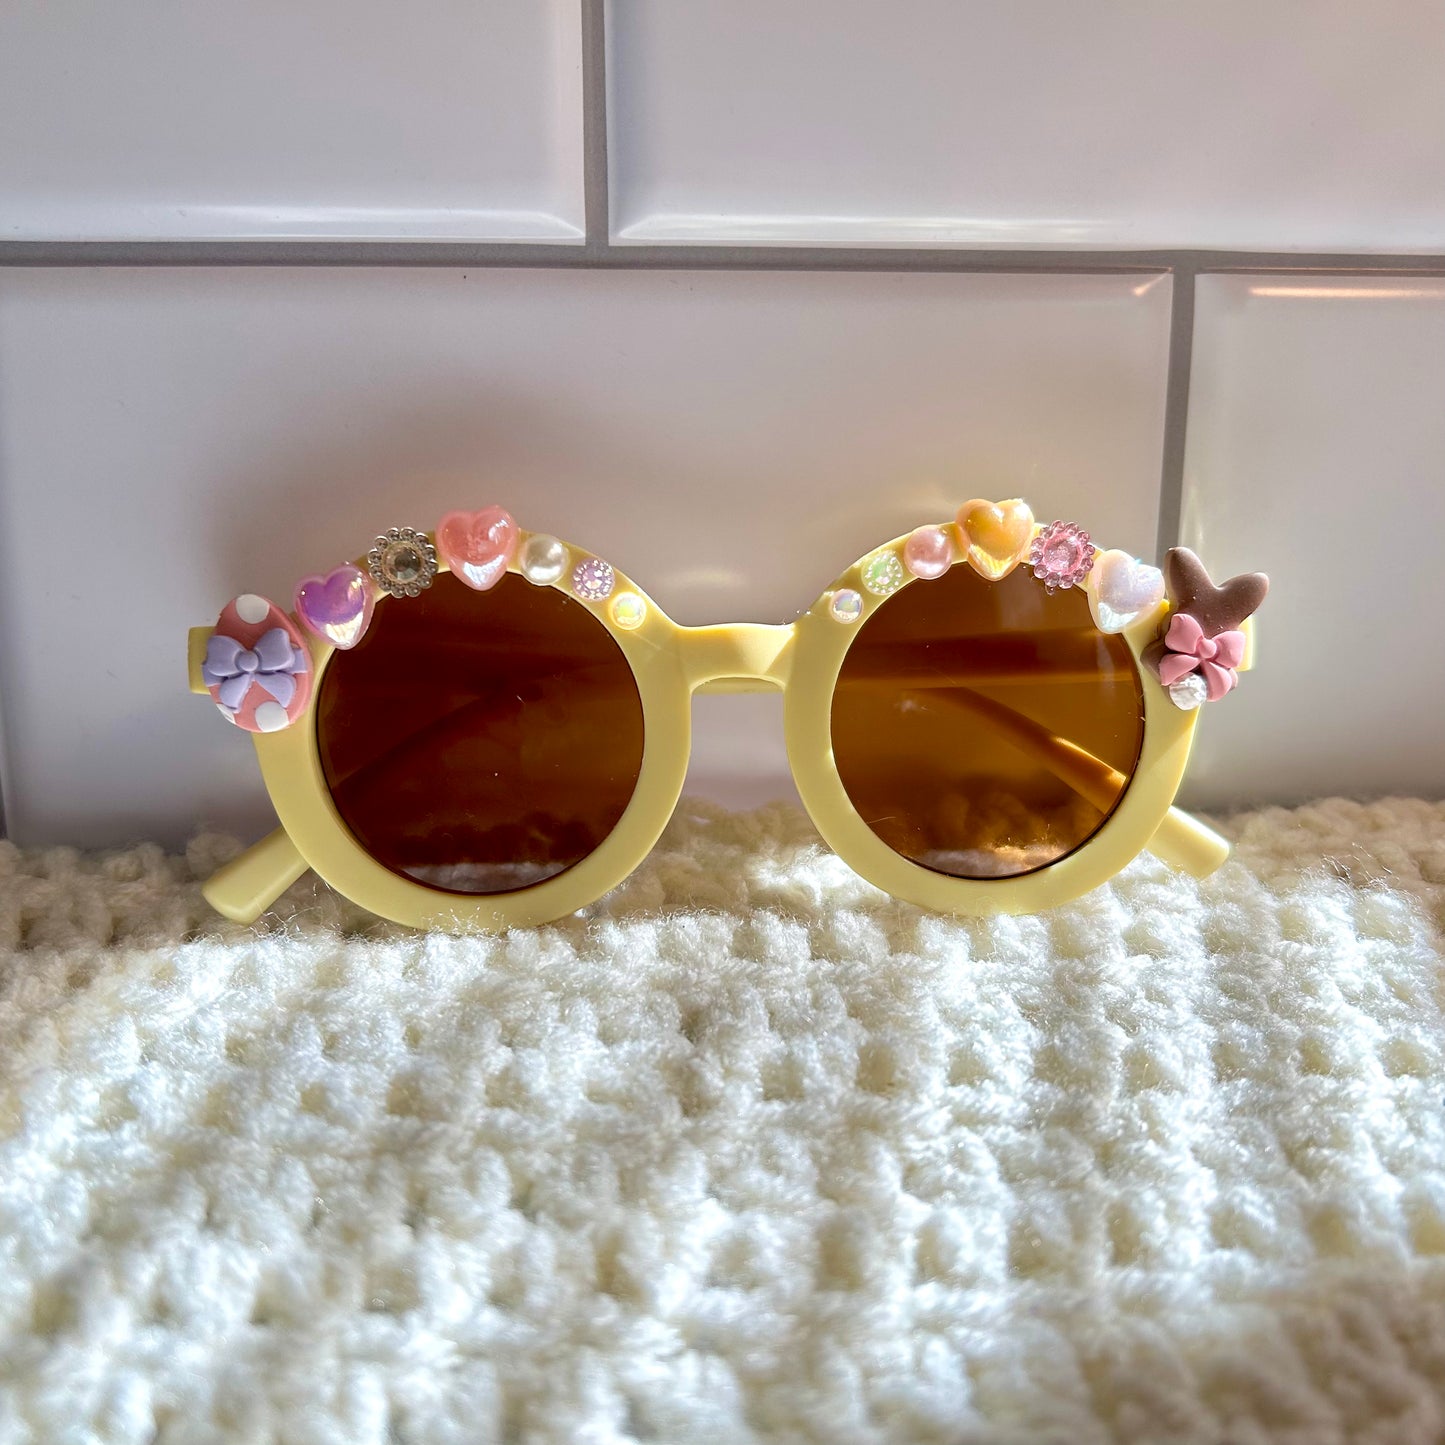 Bunnies and Bows Kids Sunglasses